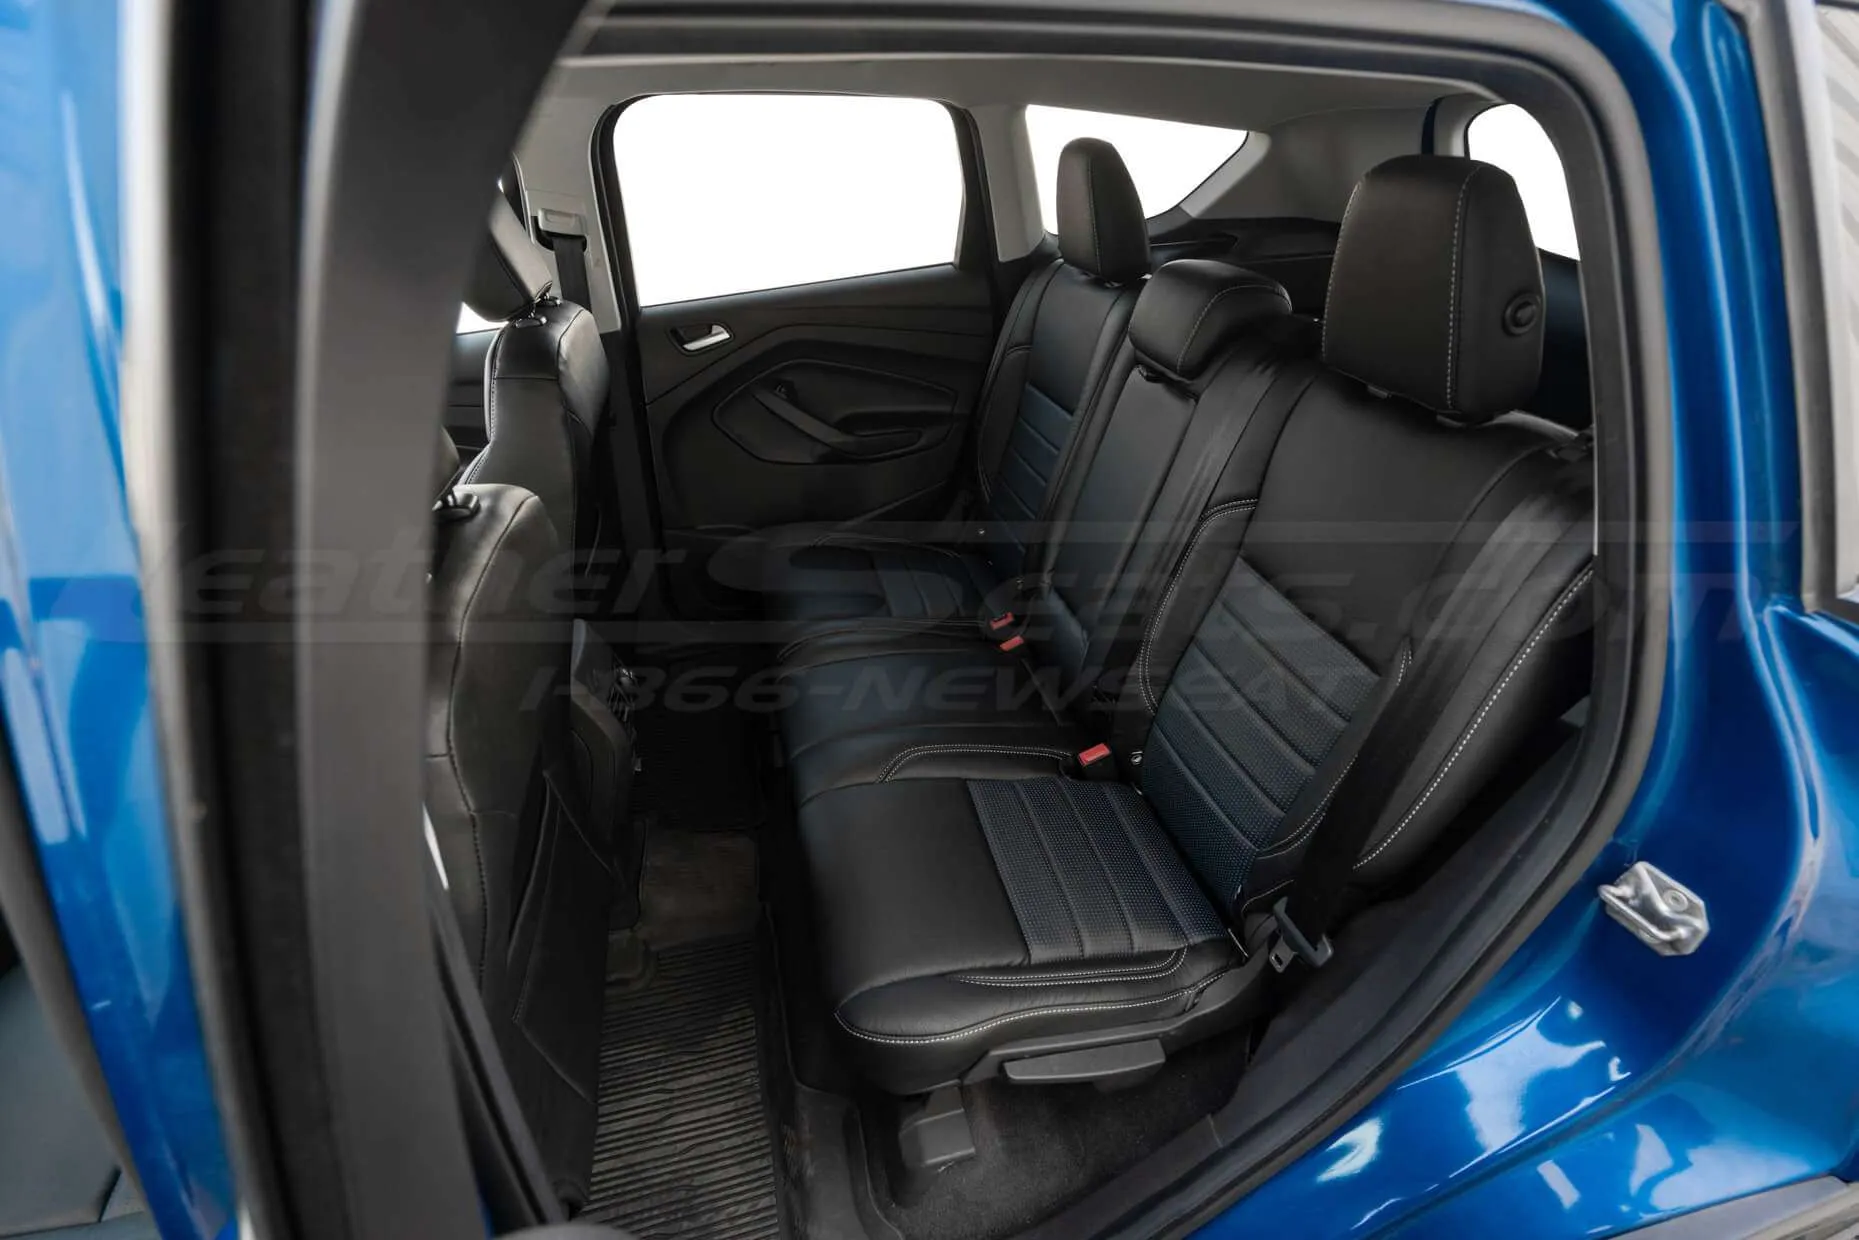 2017-2019 Ford Escape with Installed Black and Piazza Blue leather seats - Rear seatss from driver side